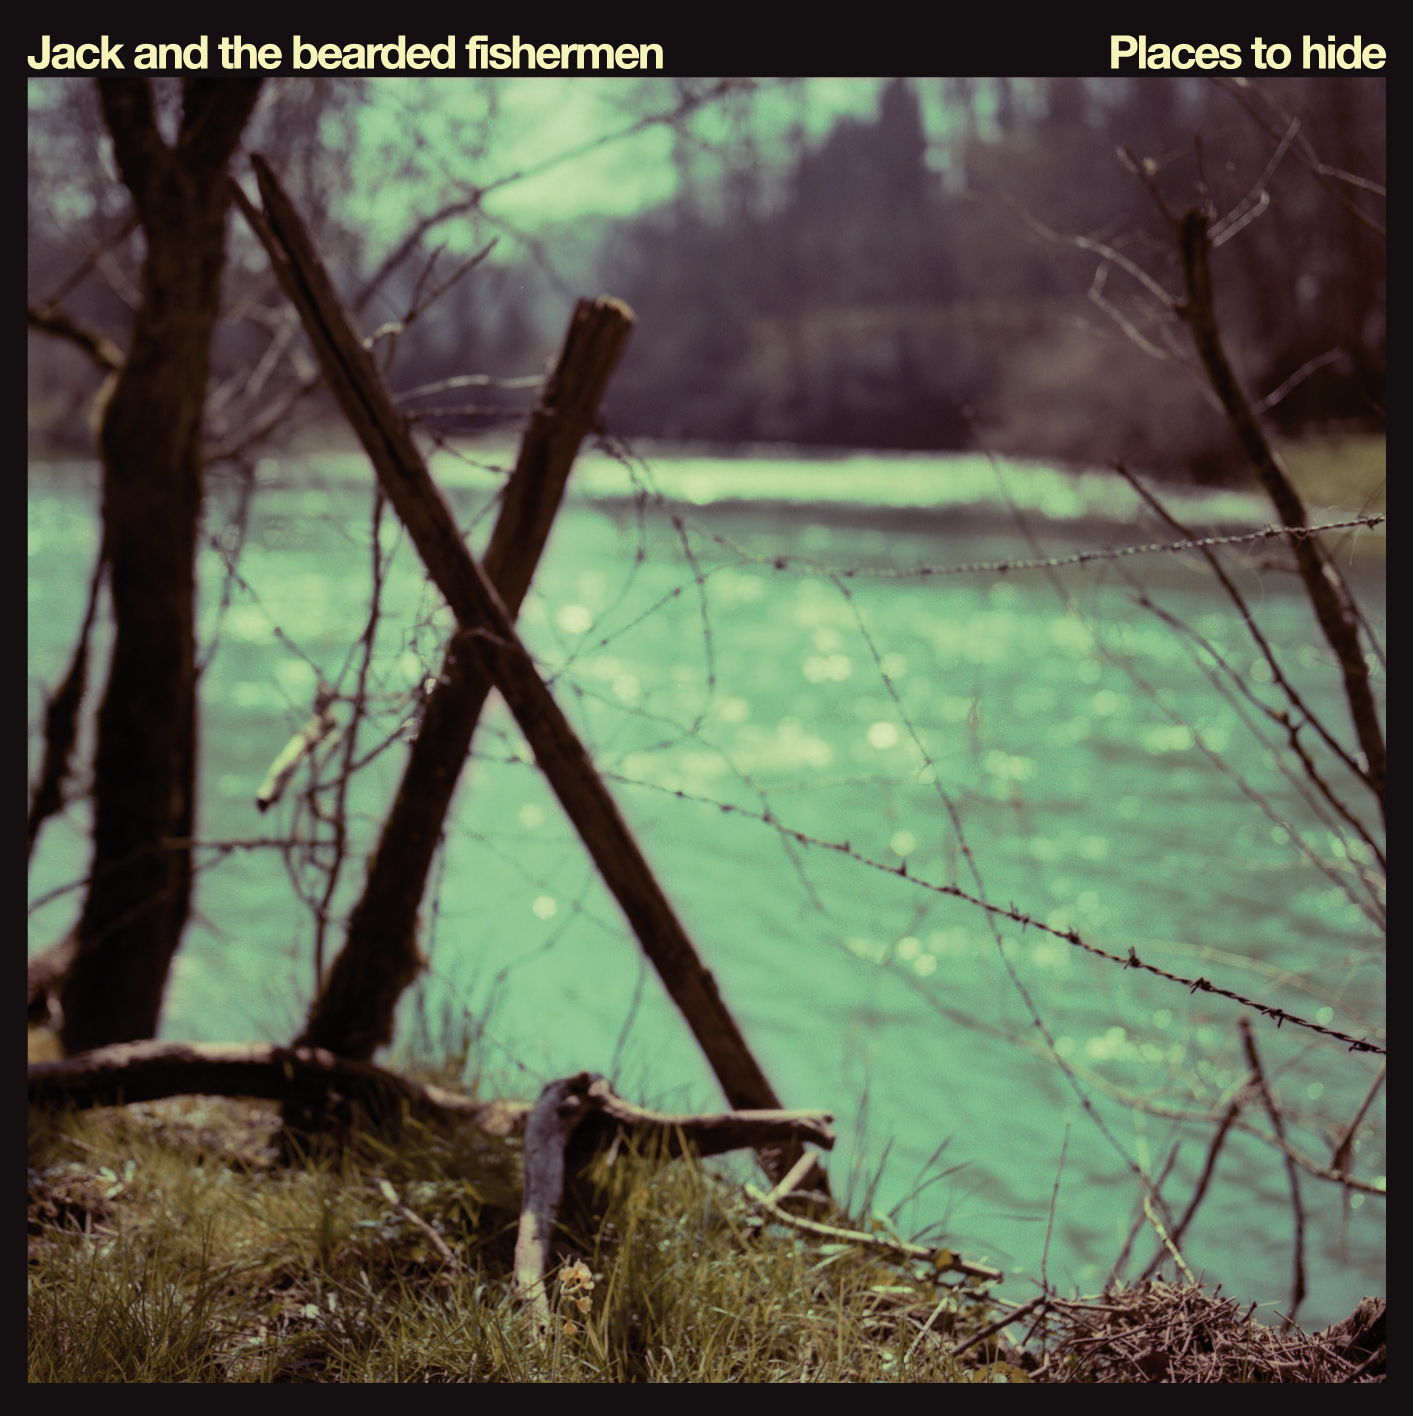 JACK AND THE BEARDED FISHERMEN "Places To Hide" LP 12"